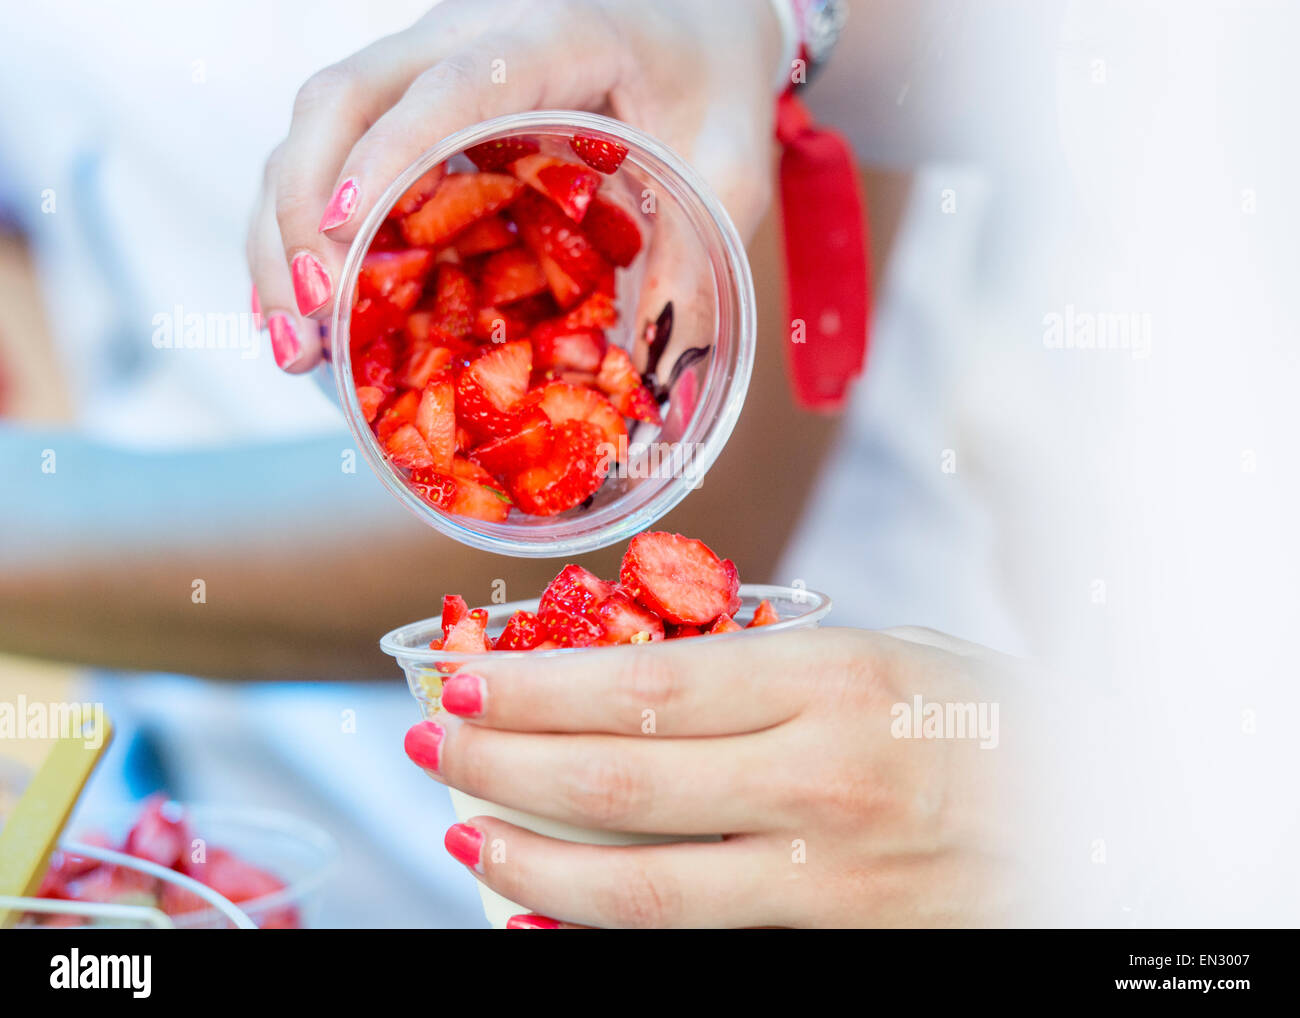 Tasty strawberry topping Stock Photo